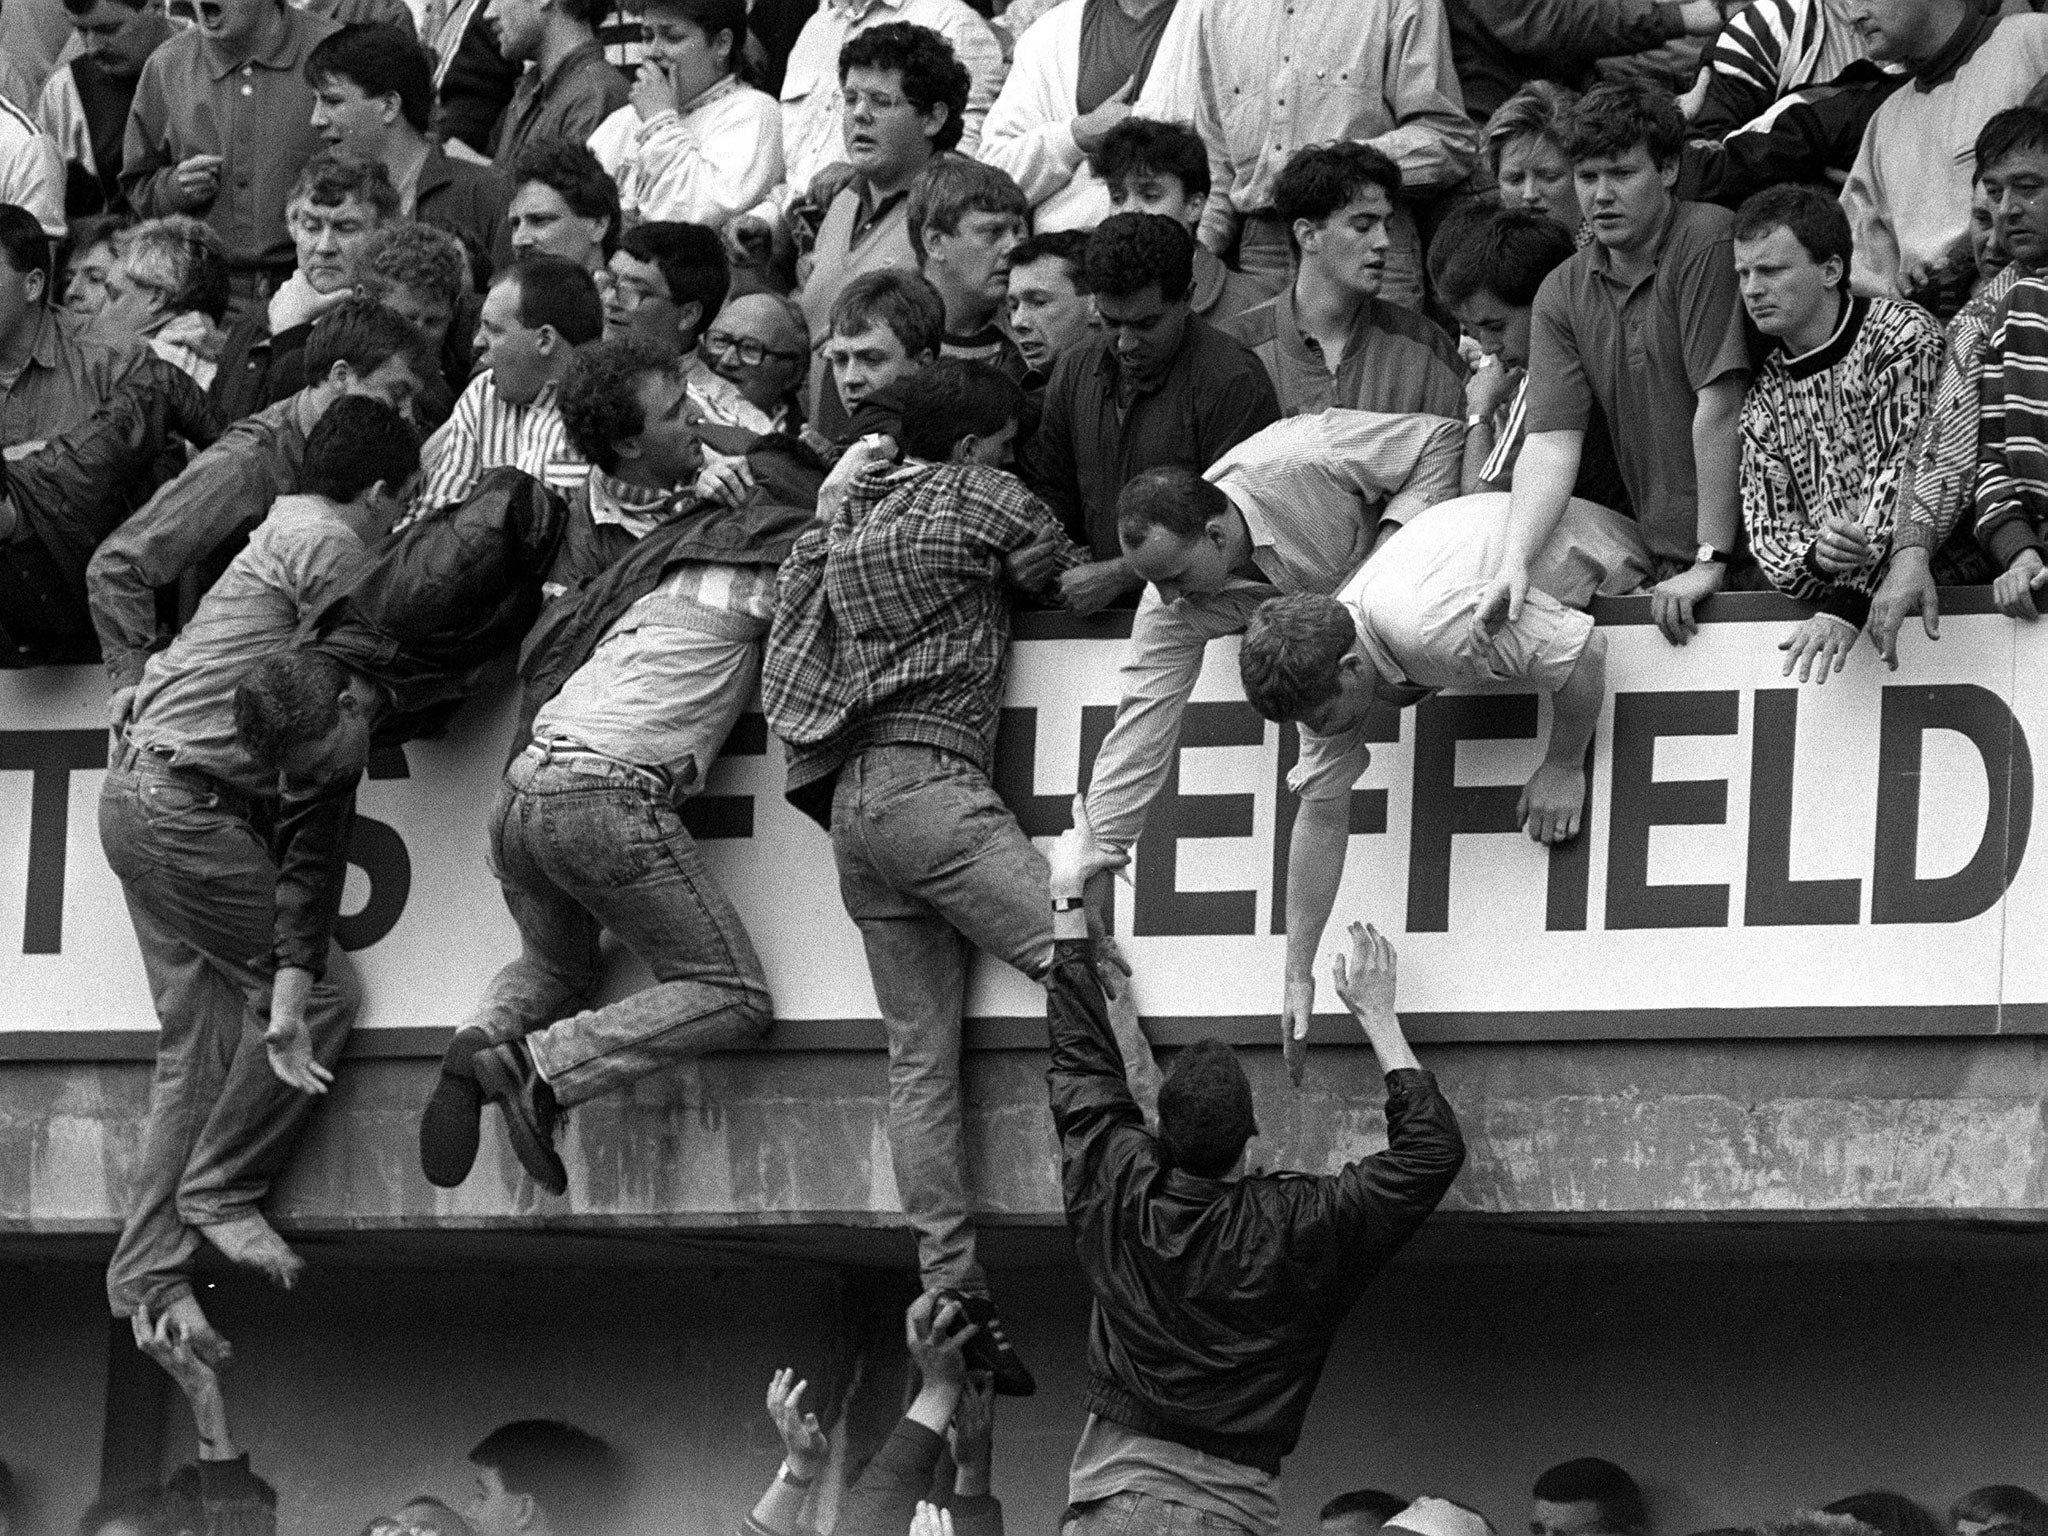 'Blame Liverpool fans' was written on the main webpage about the tragedy, in which 96 people were crushed to death in a crowd during the FA Cup semi-final game between Liverpool and Nottingham Forest in 1989